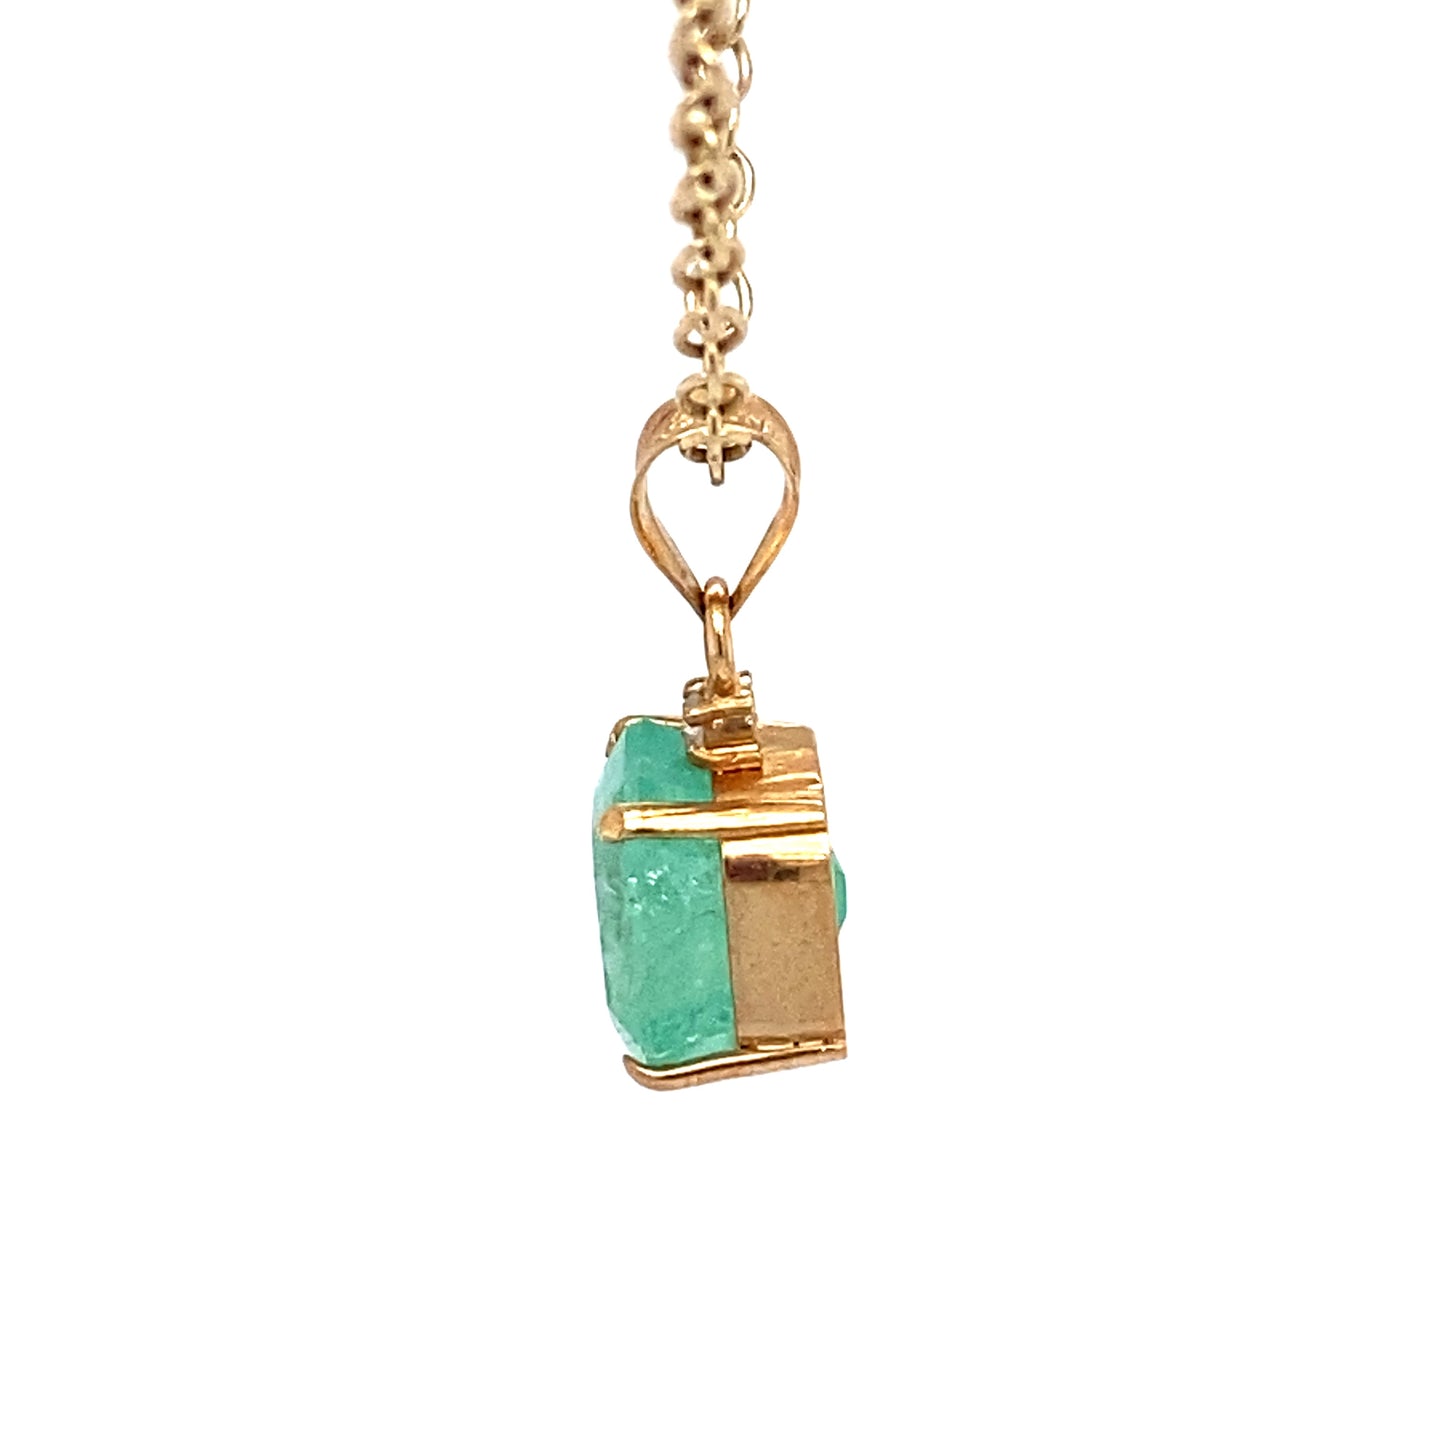 1.0 Carat Colombian Emerald and Diamond Pendant in 14K Gold